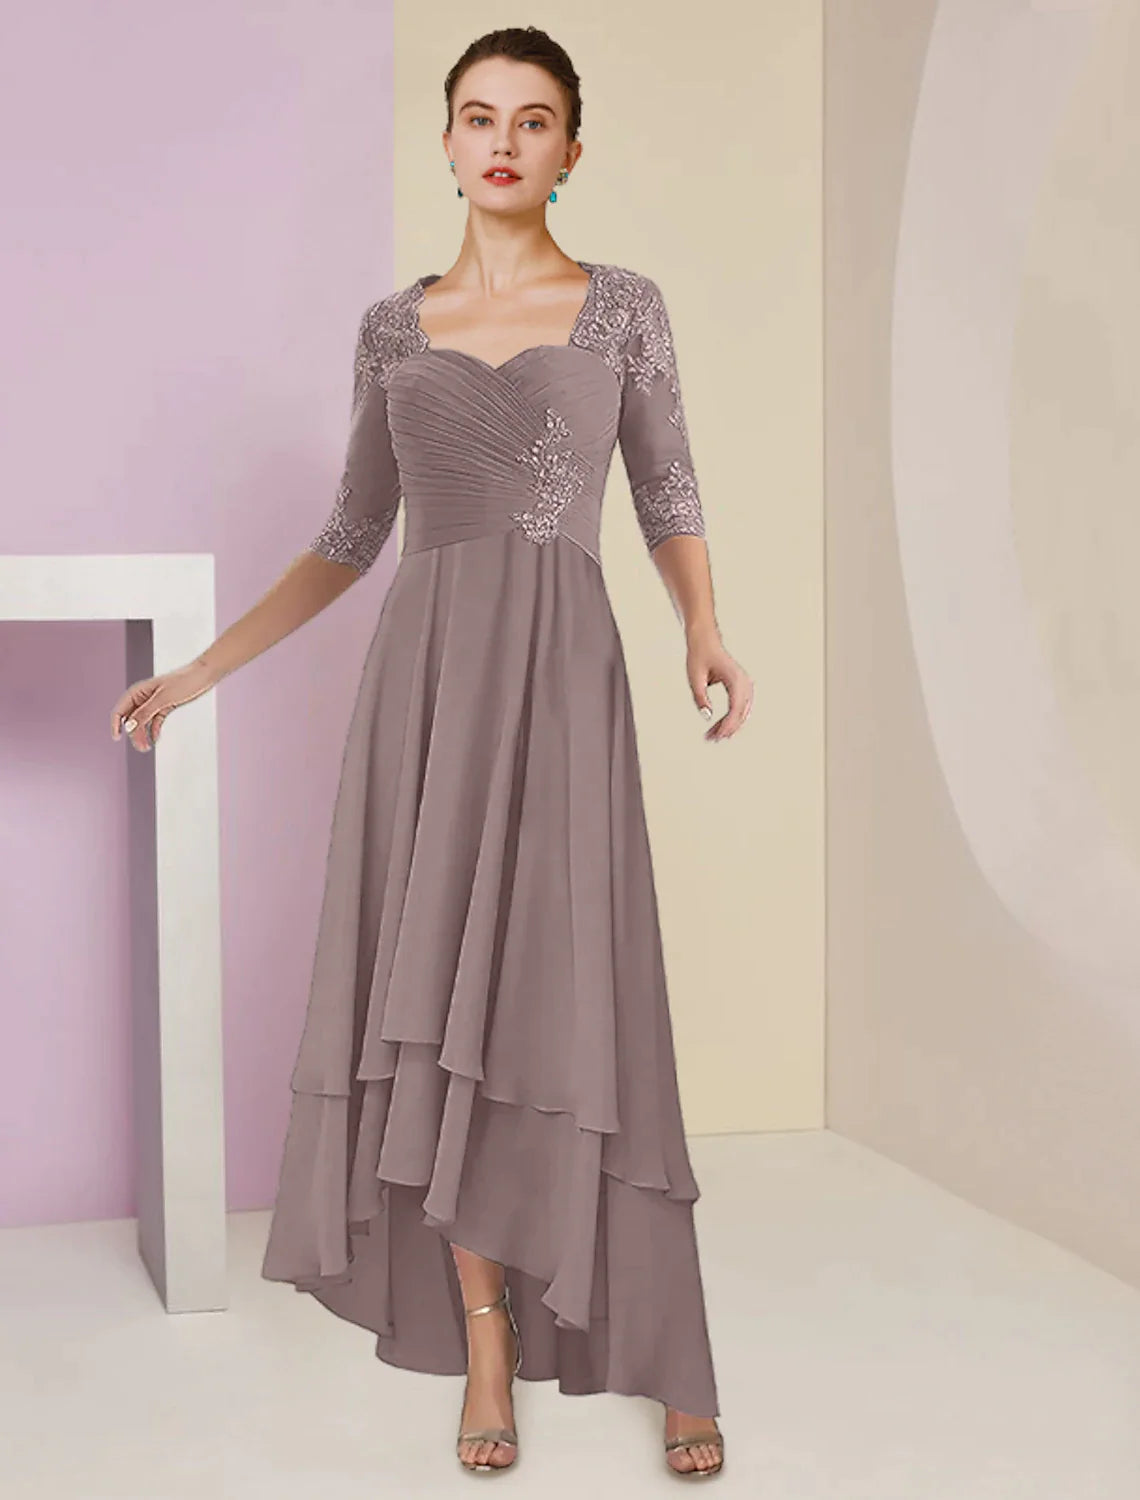 Two Piece A-Line Mother of the Bride Dress Formal Wedding Guest Elegant Square Neck Asymmetrical Tea Length Chiffon Lace 3/4 Length Sleeve Wrap Included with Ruched Tier Appliques